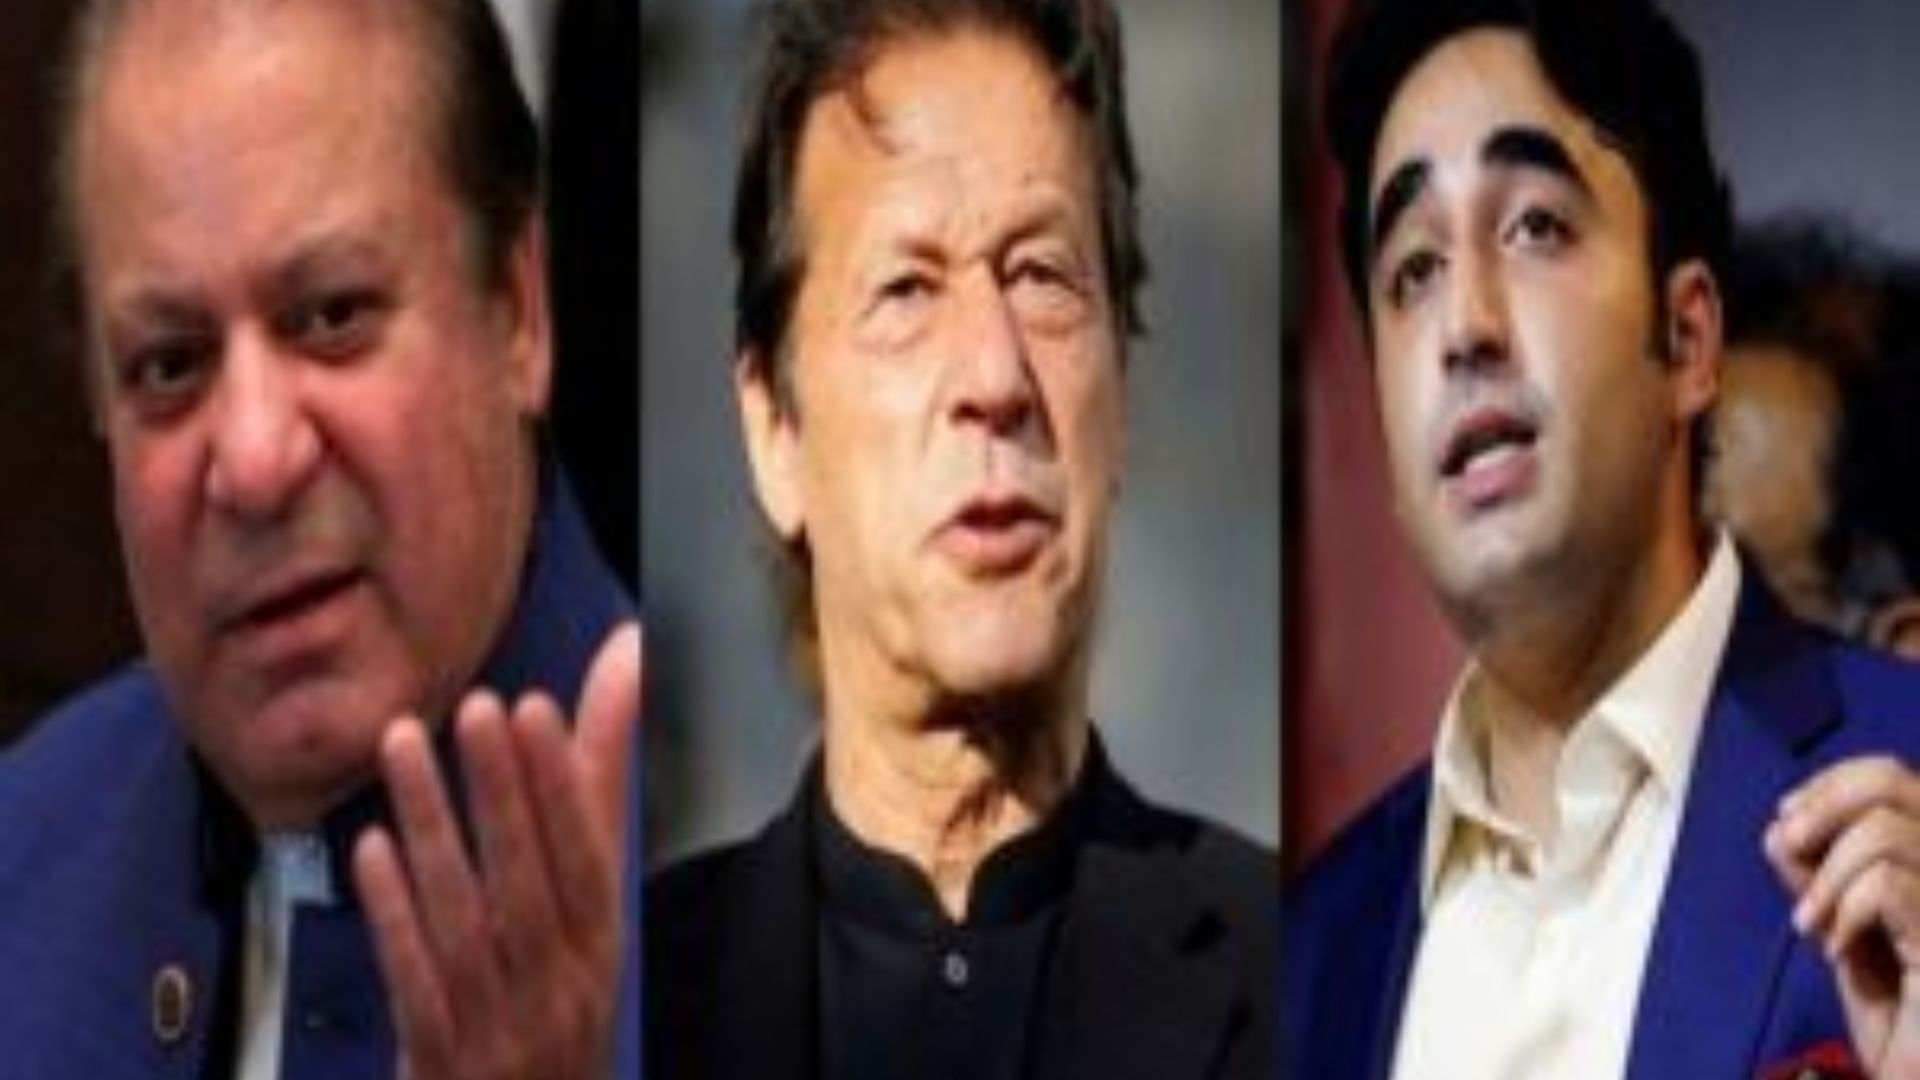 PTI-backed independents leading in close race with PML-N, PPP, according to media reports